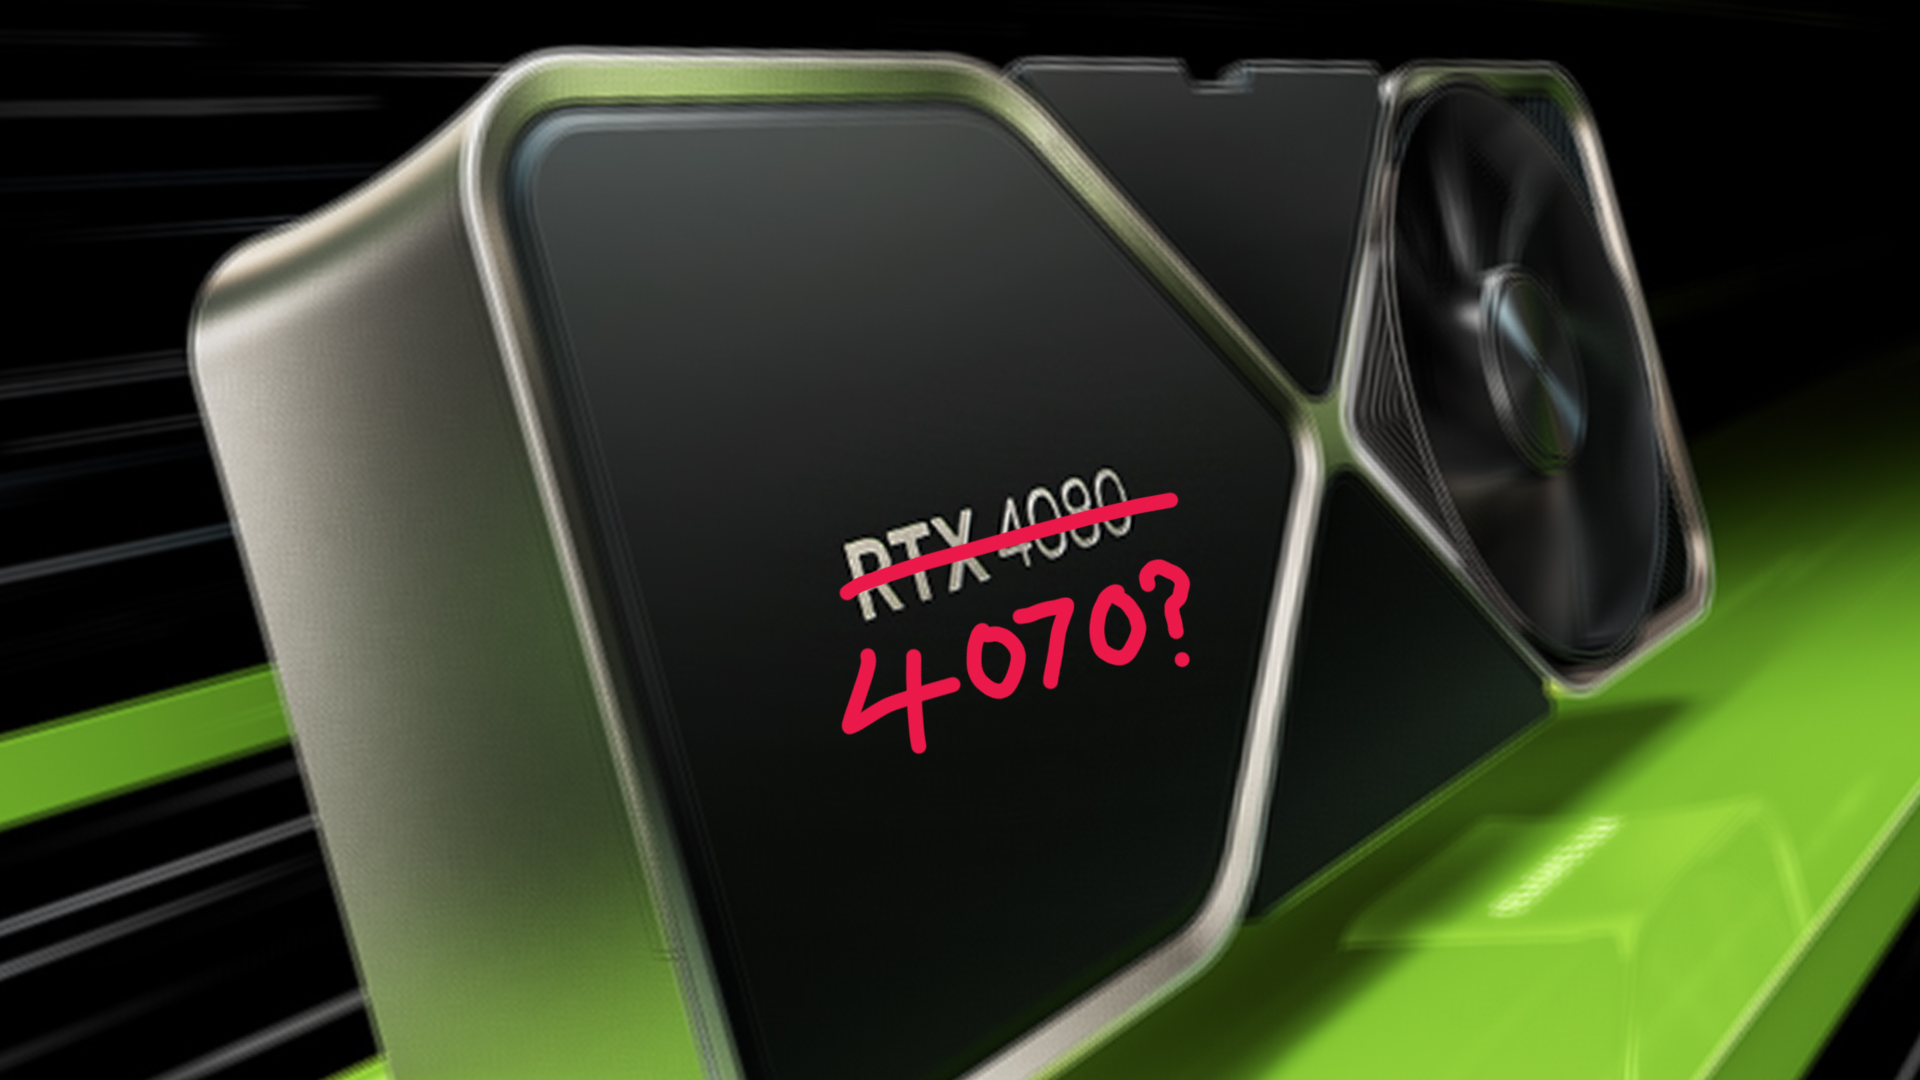  Latest rumour prices Nvidia's upcoming RTX 4070 at $599 